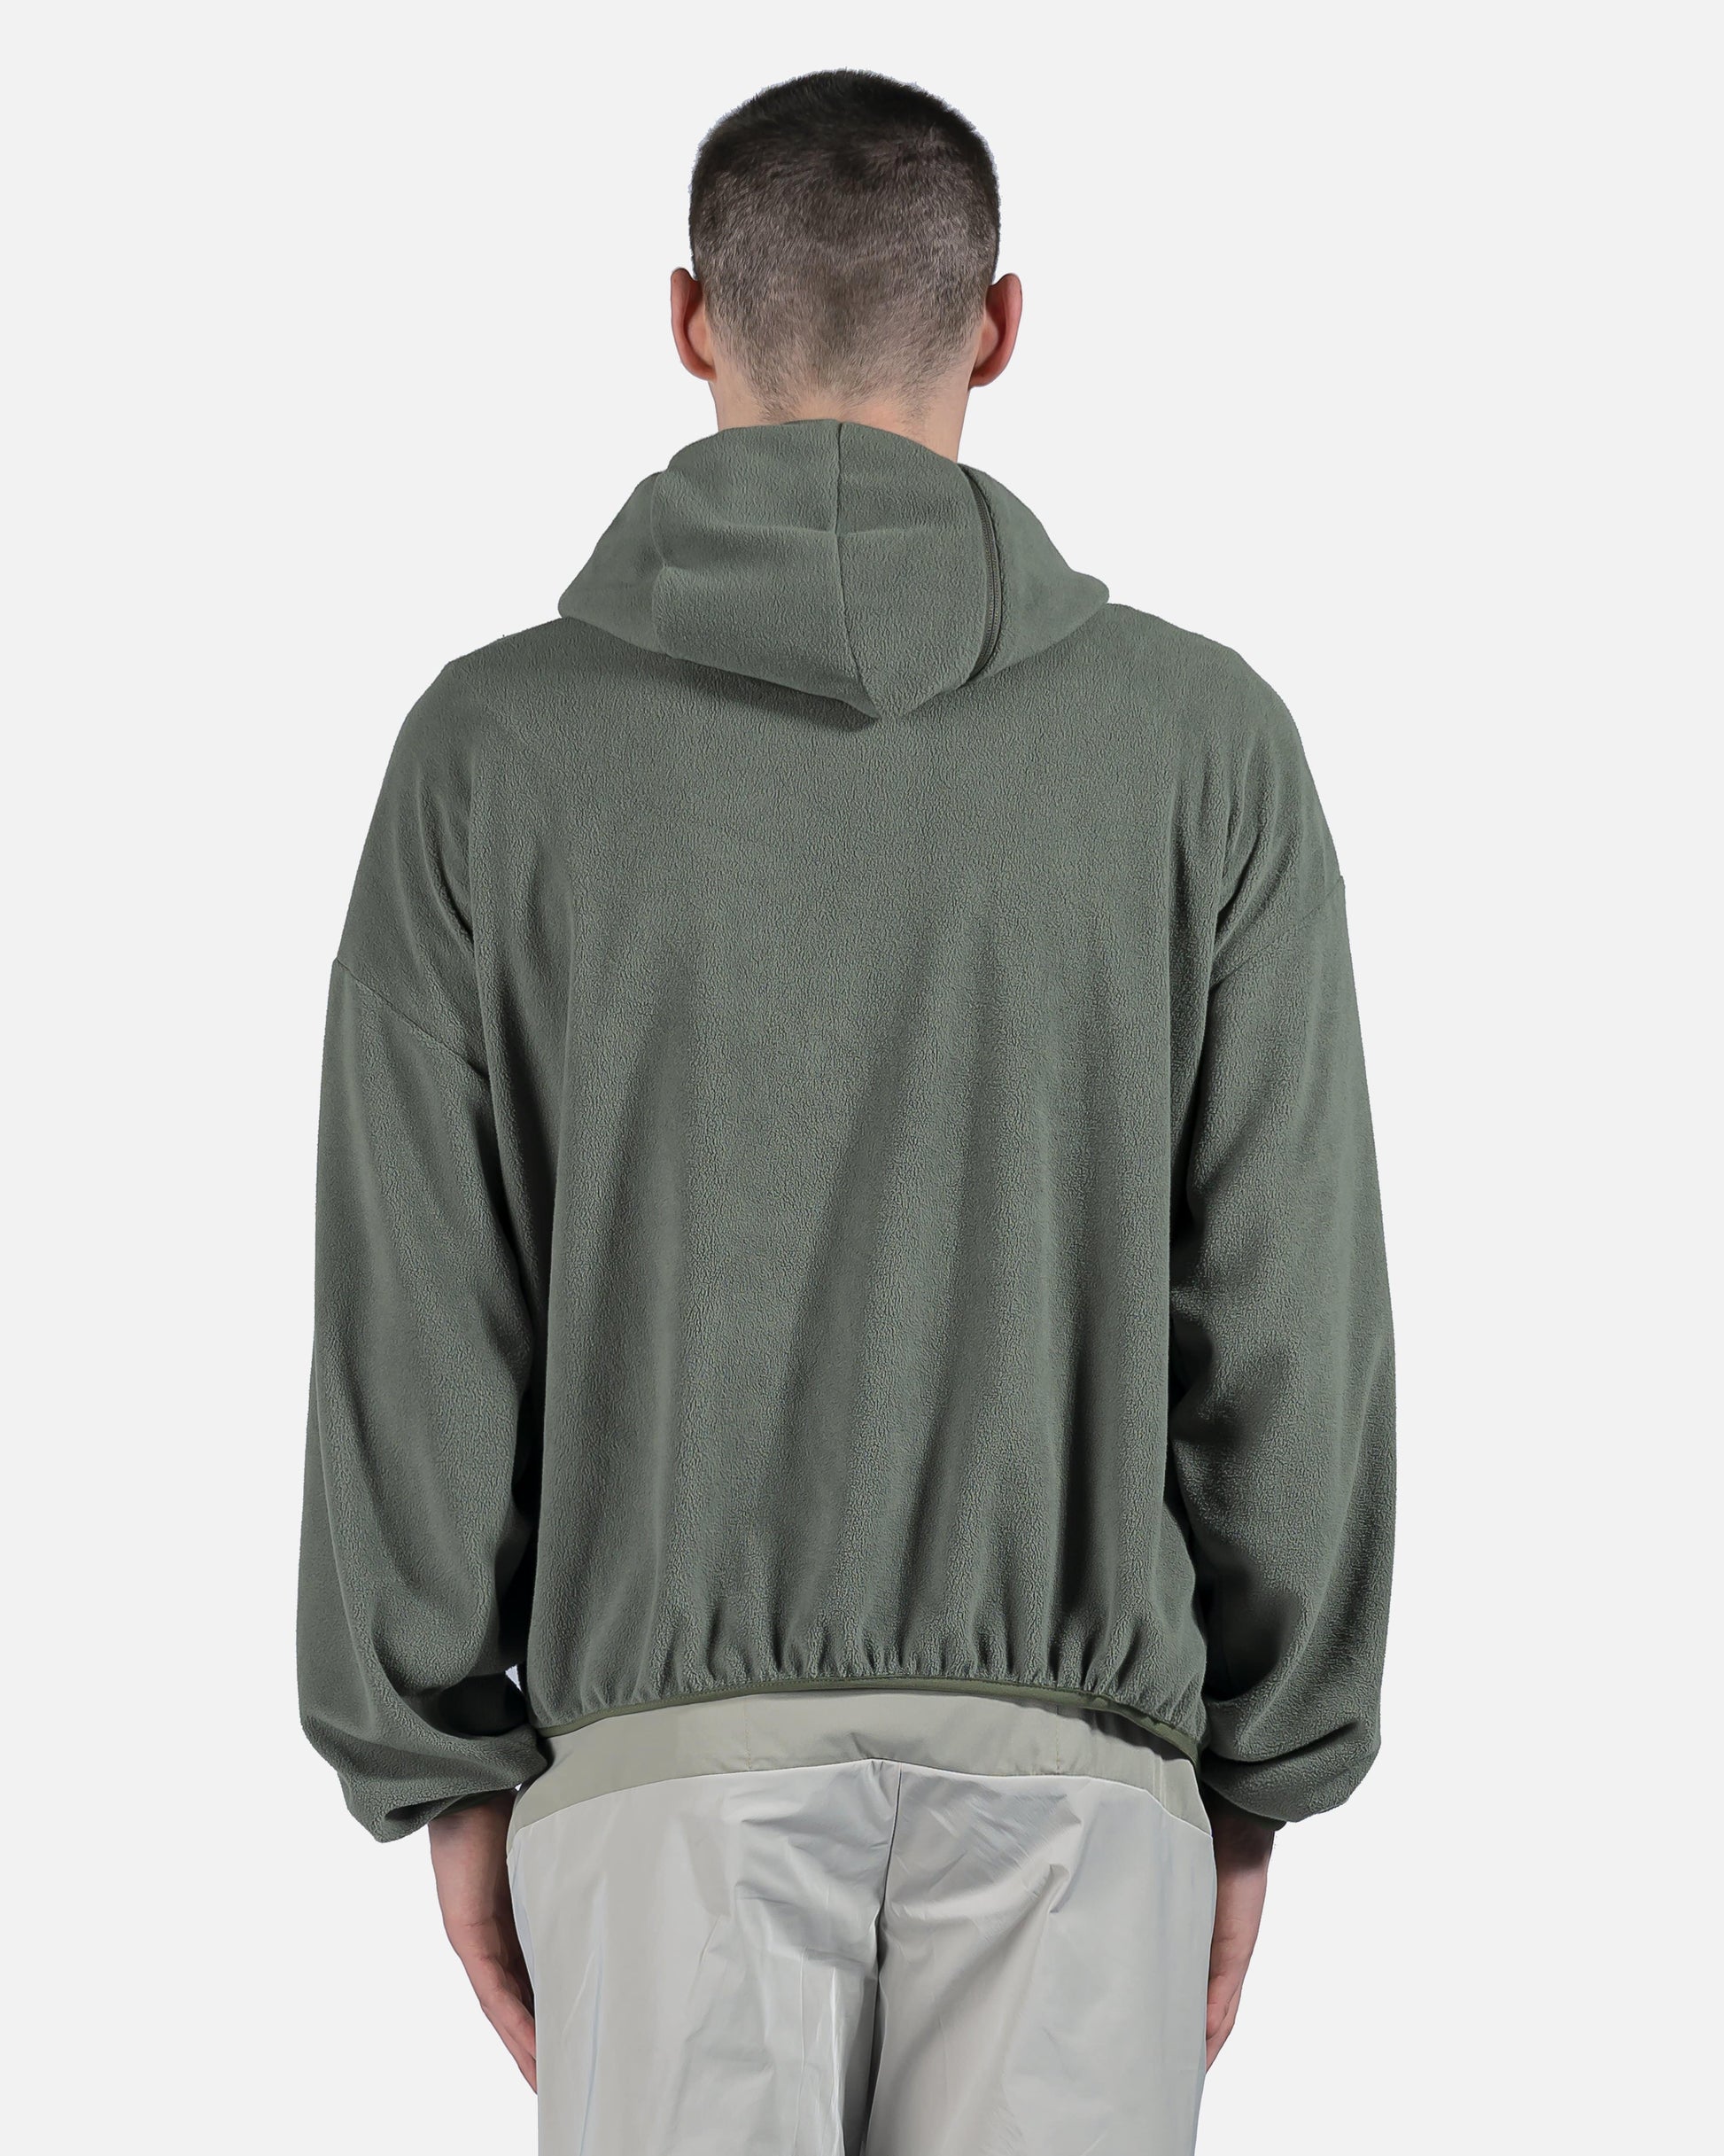 POST ARCHIVE FACTION (P.A.F) Men's Sweatshirts 4.0+ Hoodie Center in Olive Green